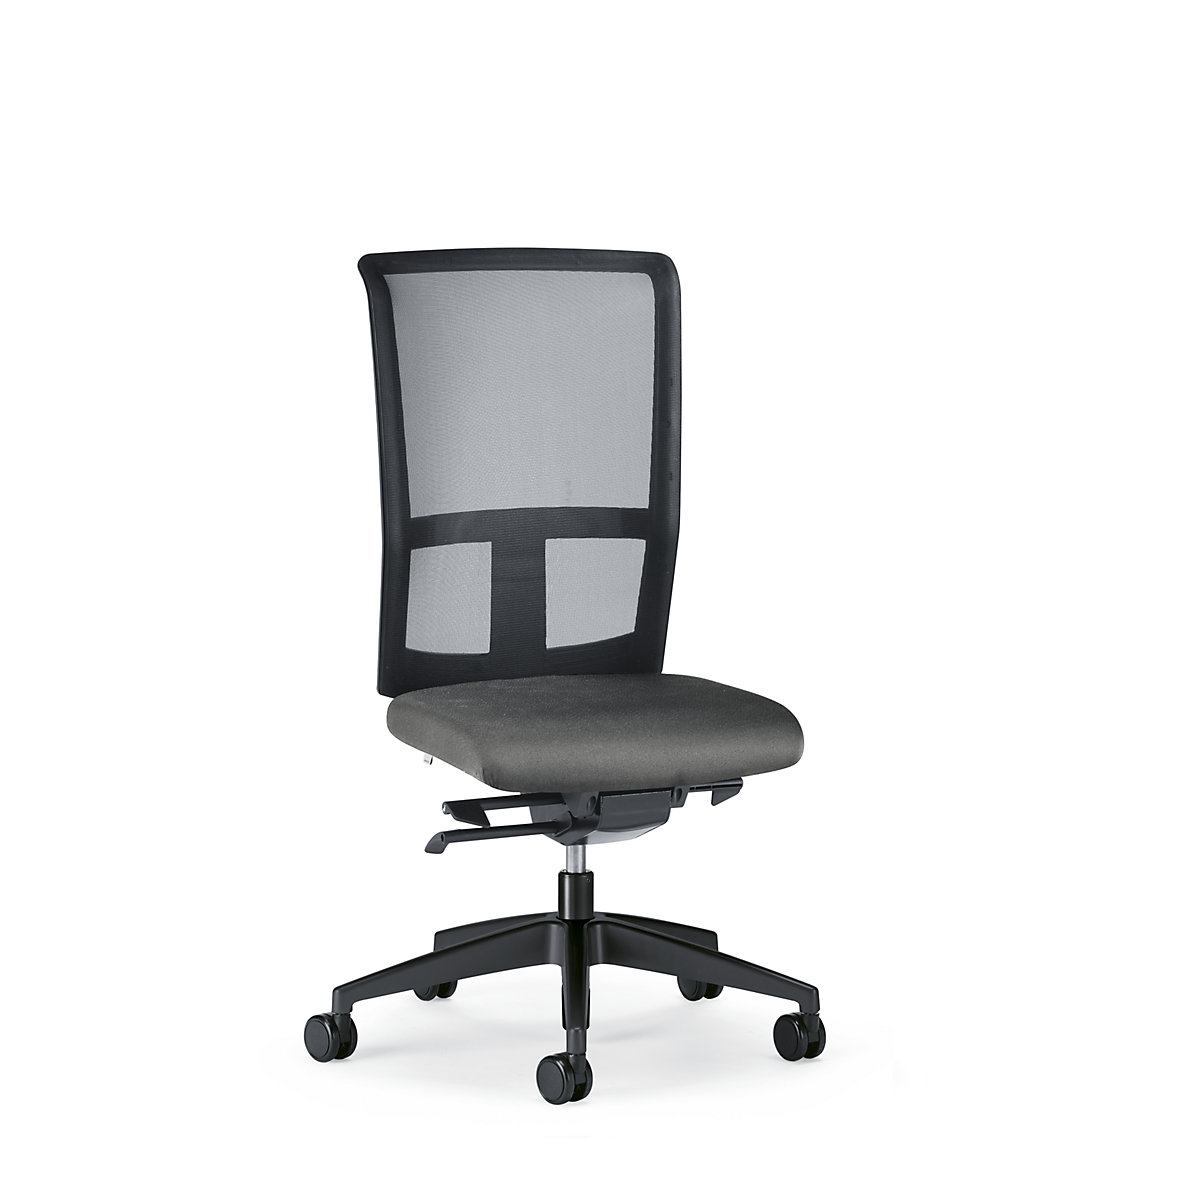 GOAL AIR office swivel chair, back rest height 545 mm – interstuhl, black frame, with soft castors, iron grey, seat depth 410 mm-6